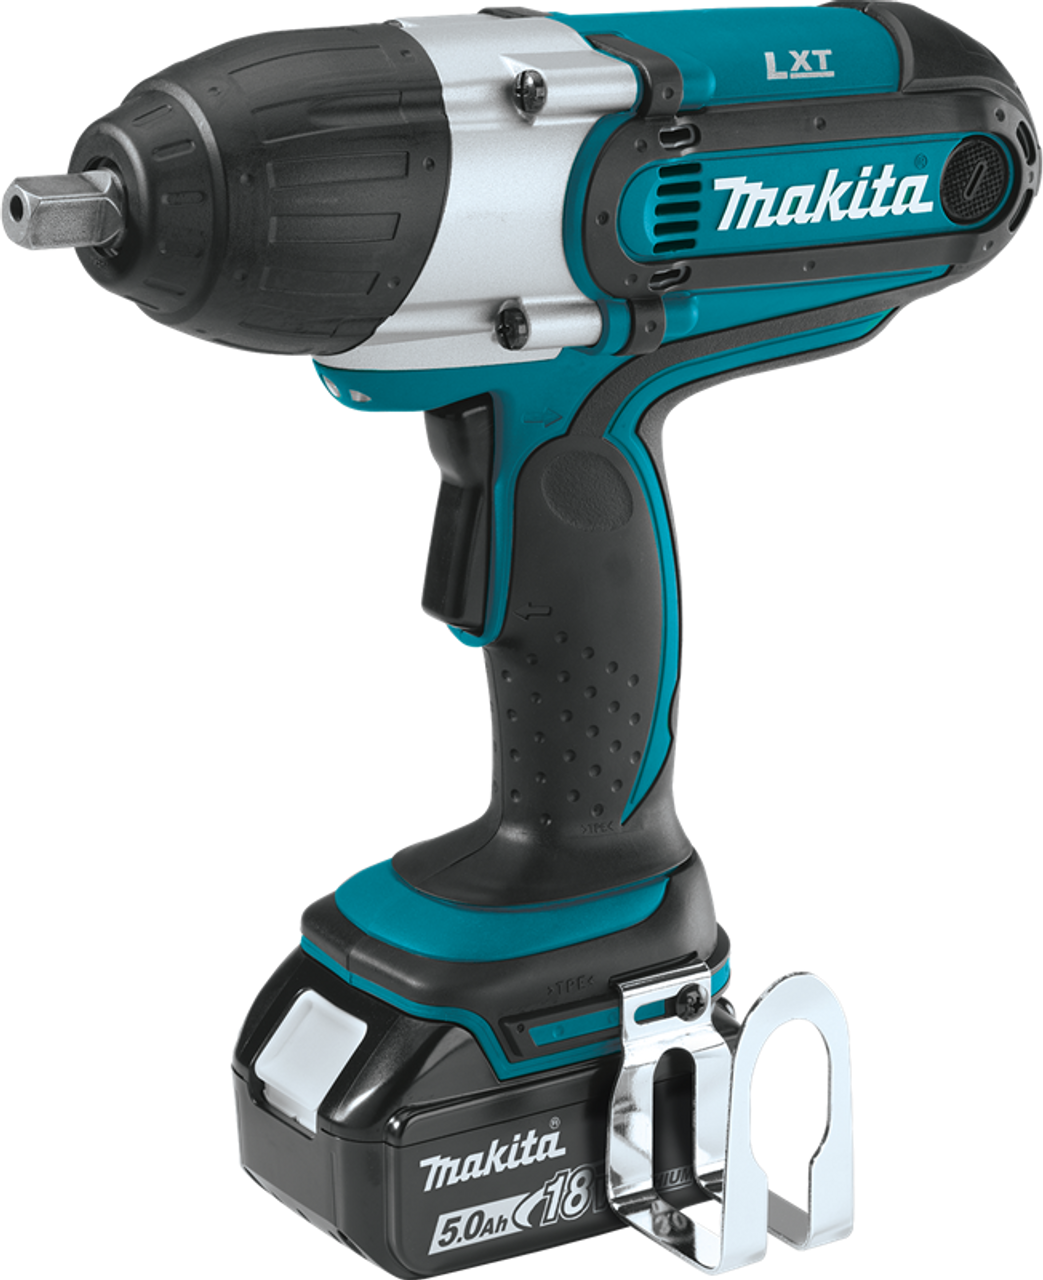 18V LXT? Lithium-Ion Cordless 1/2" Sq. Drive Impact Wrench Kit (5.0Ah), Makita-built motor delivers , XWT04TX